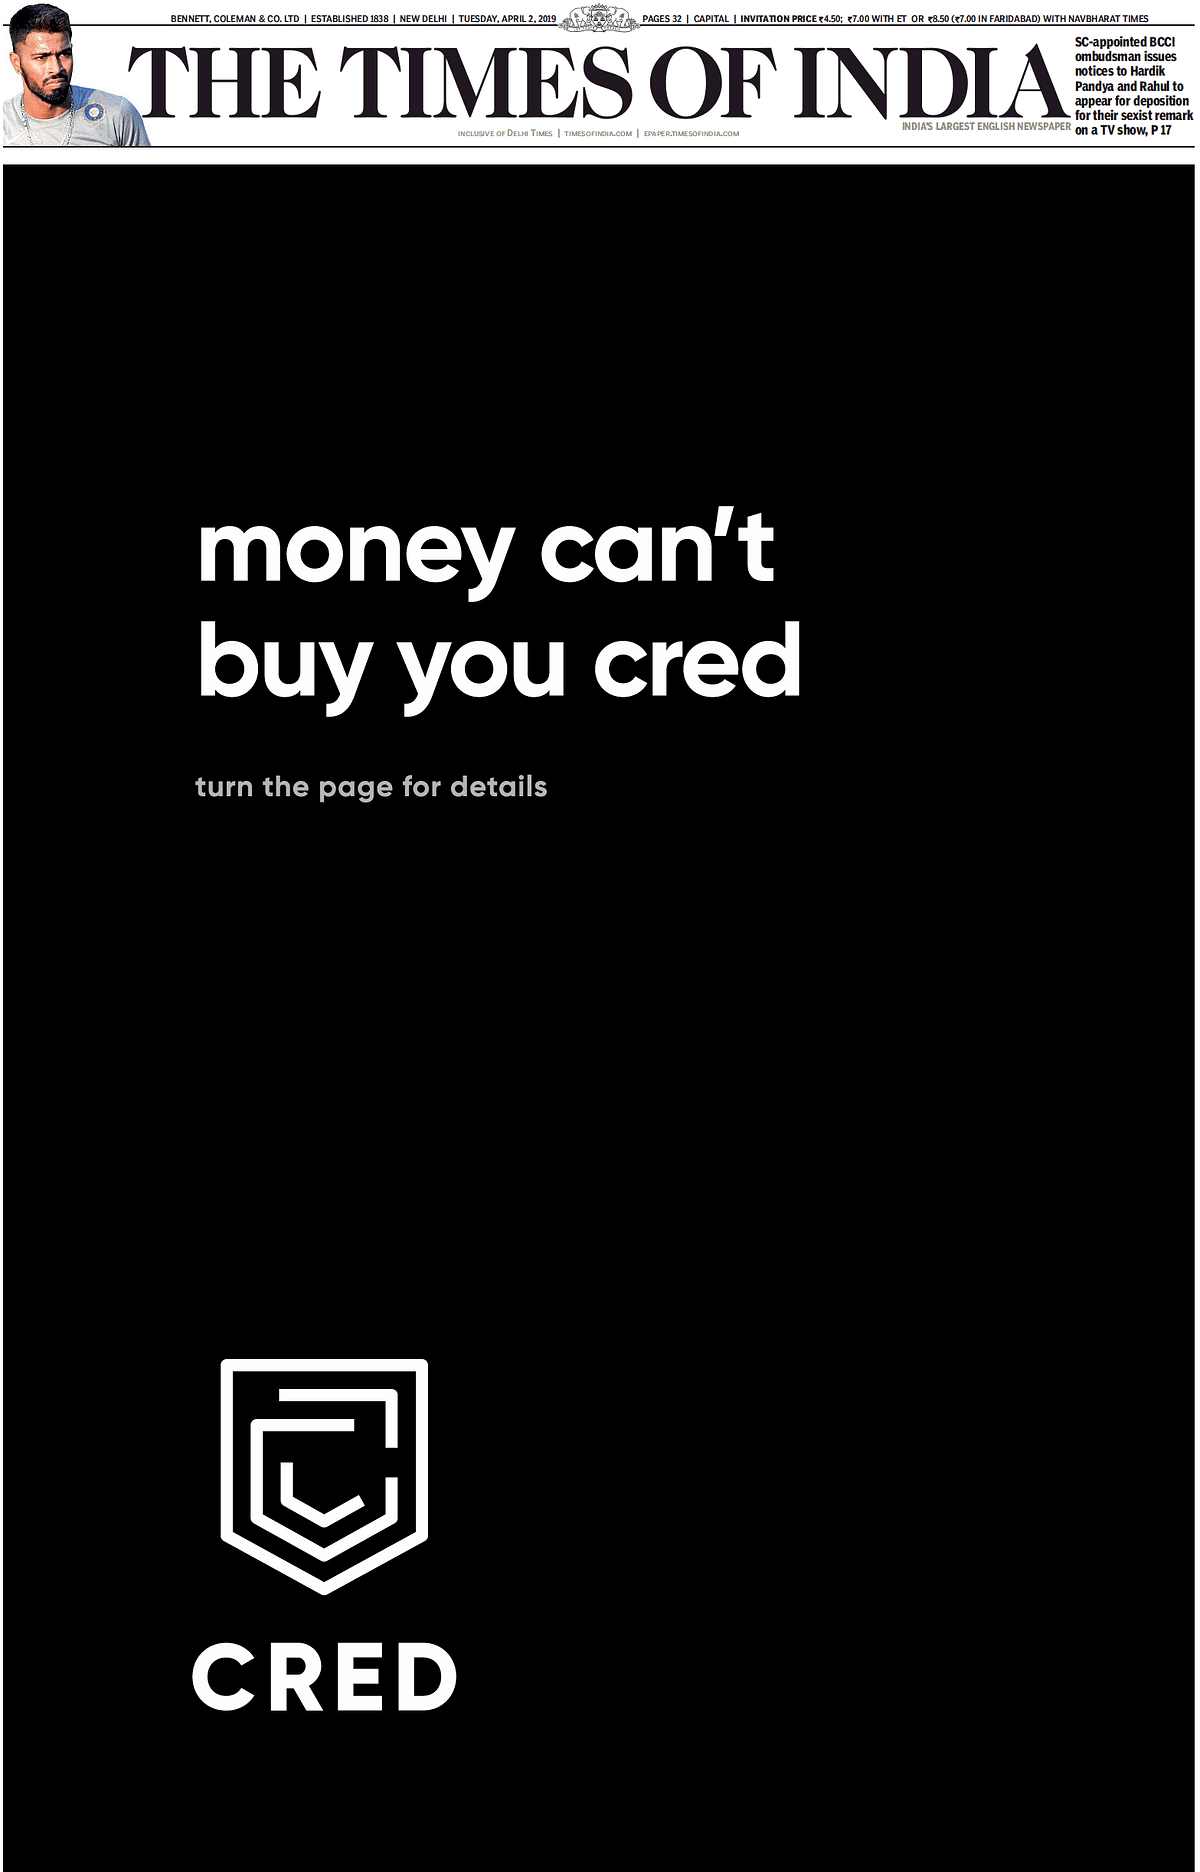 Cred's full page ad on Times of India